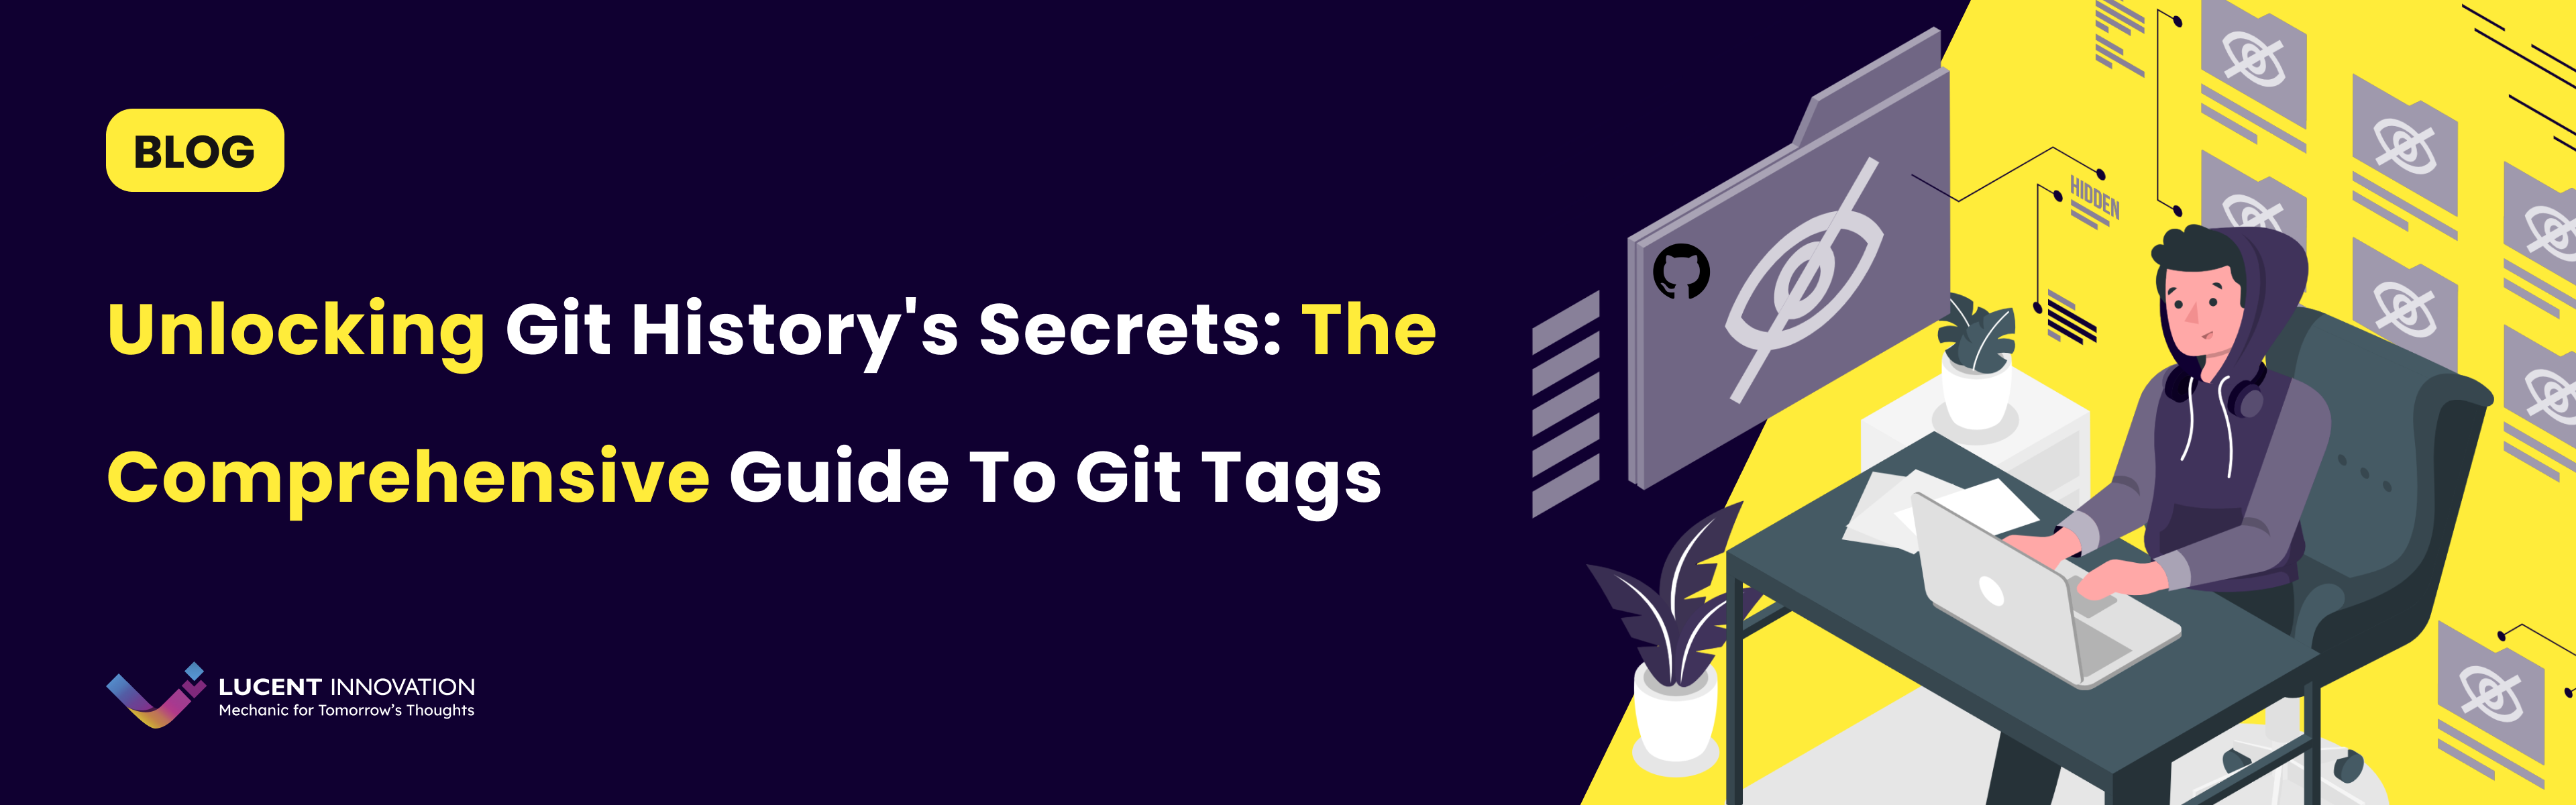 Unlocking Git History's Secrets: The Comprehensive Guide To Git Tags